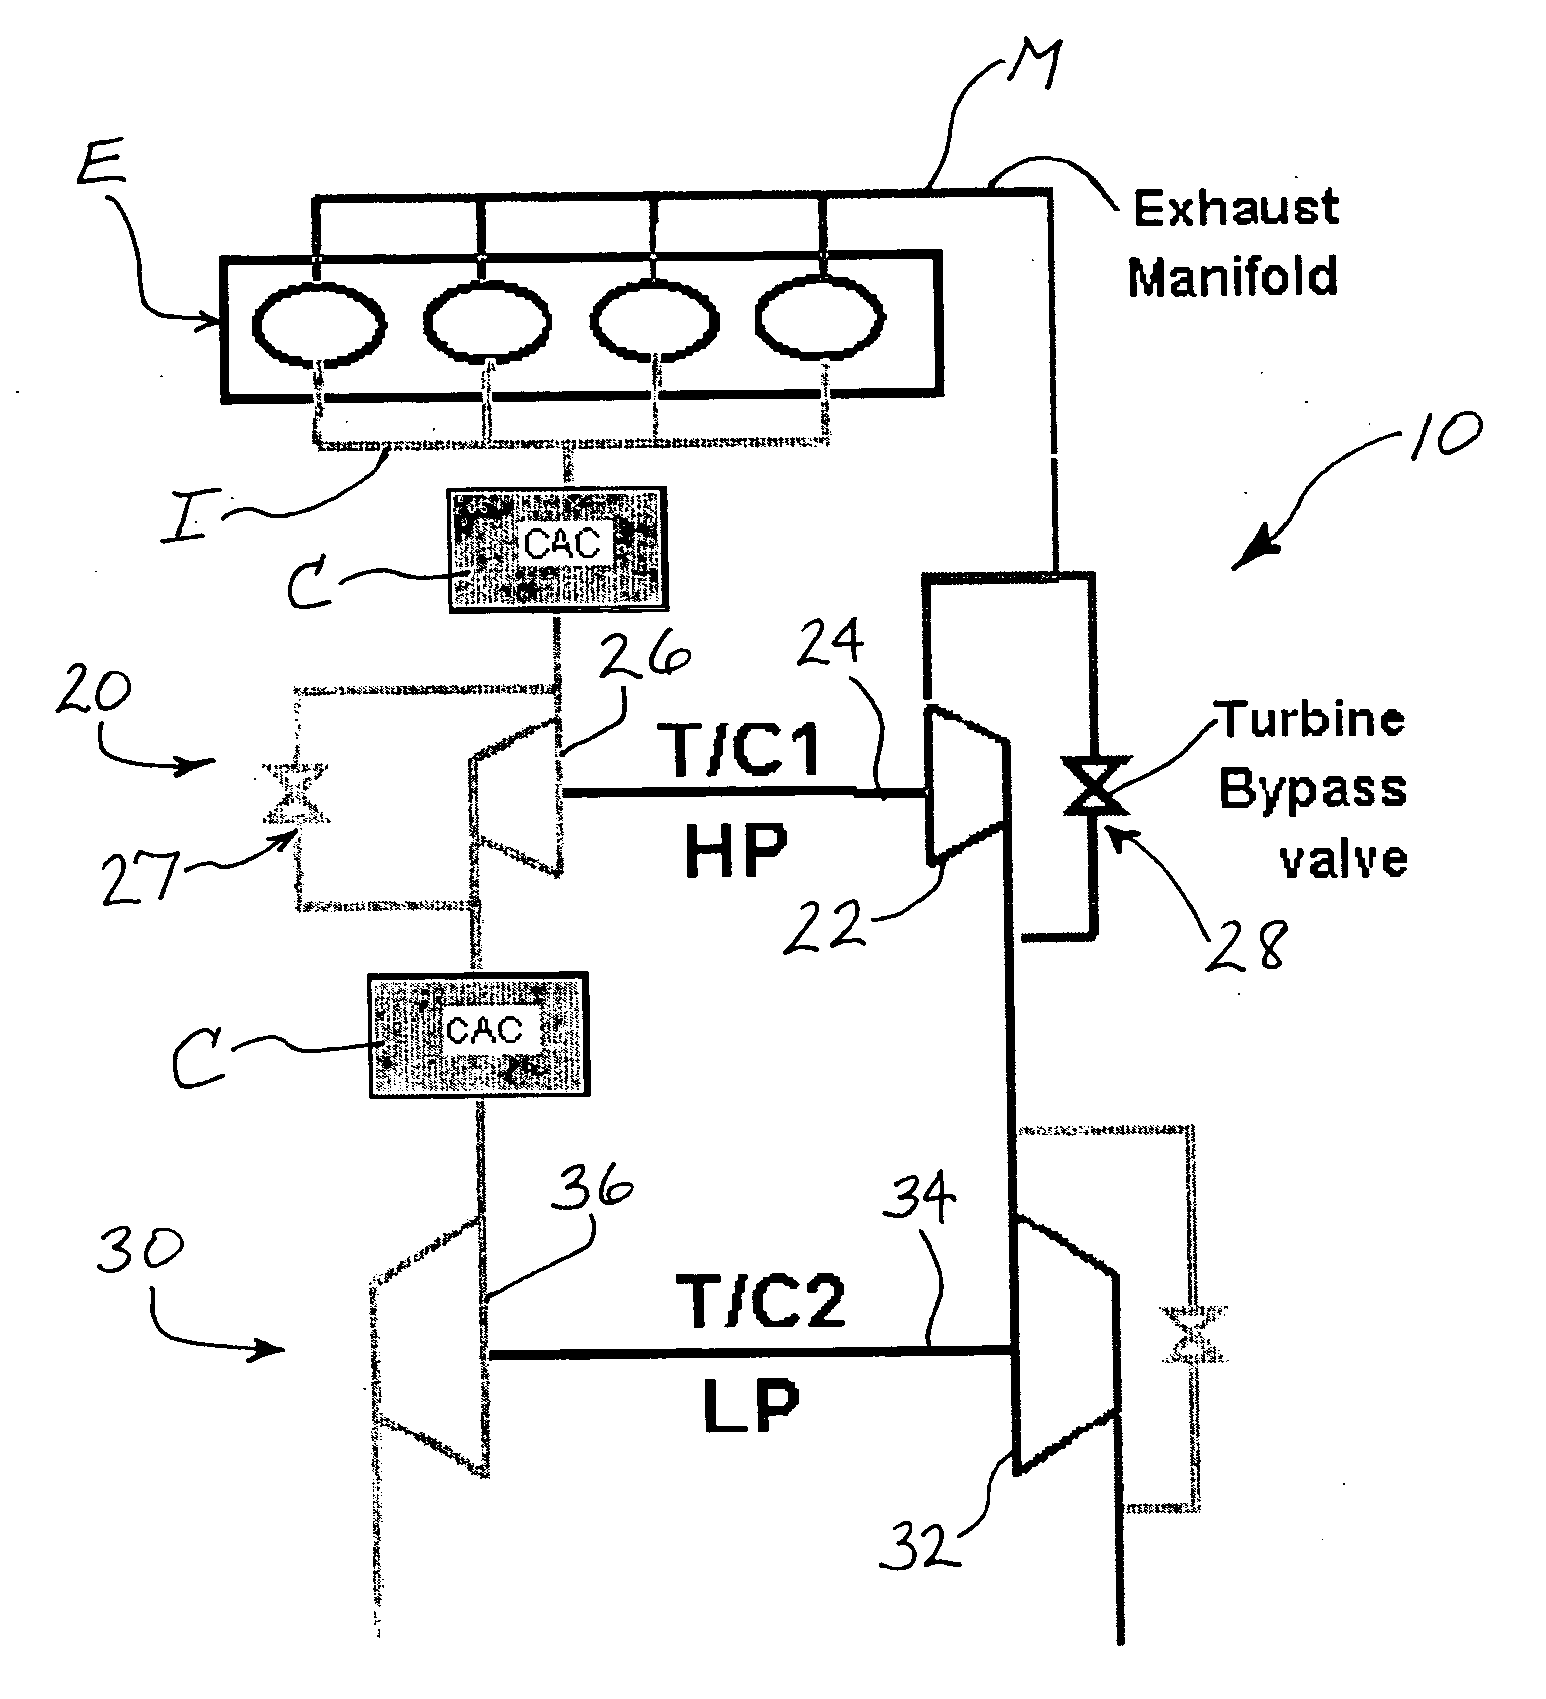 Two-stage turbocharger system with integrated exhaust manifold and bypass assembly